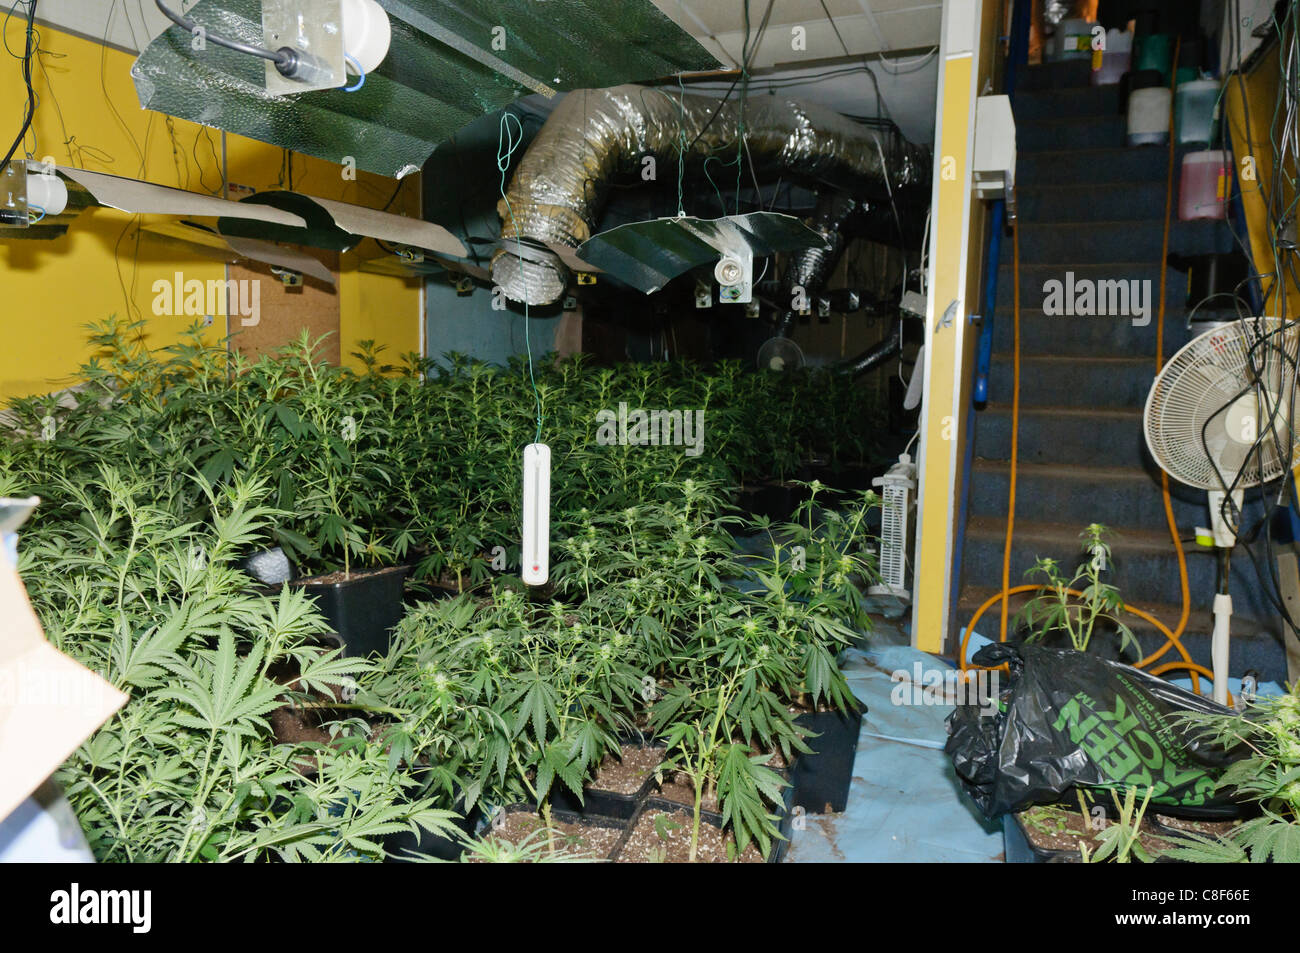 Cannabis plants in an illegal and hidden cannabis factory warehouse with high-powered grow lamps and ventilation system. Stock Photo